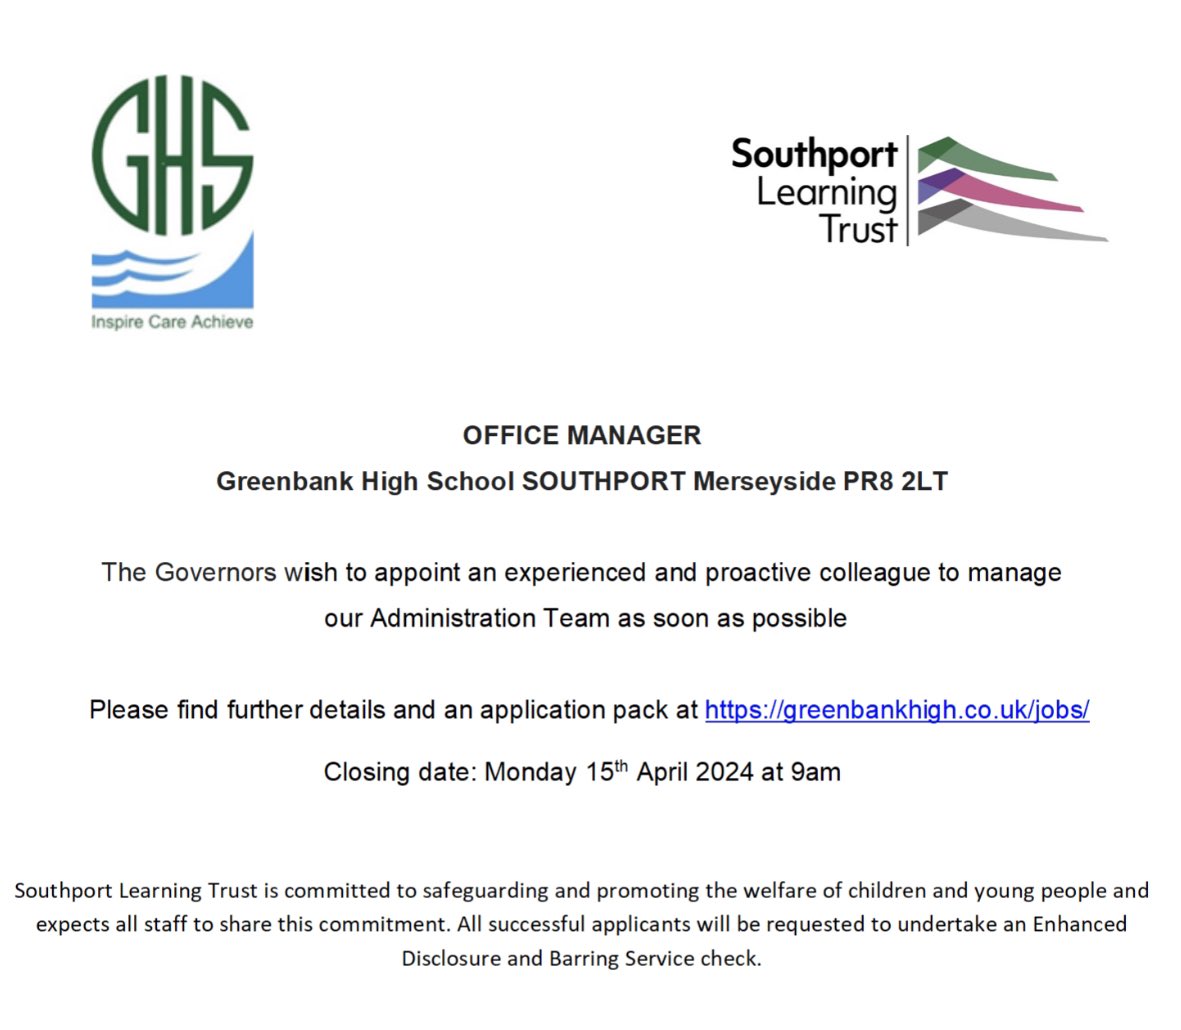 We currently have a vacancy for an Office Manager. Please find further details and an application pack at greenbankhigh.co.uk/jobs/  @SouthportLTrust